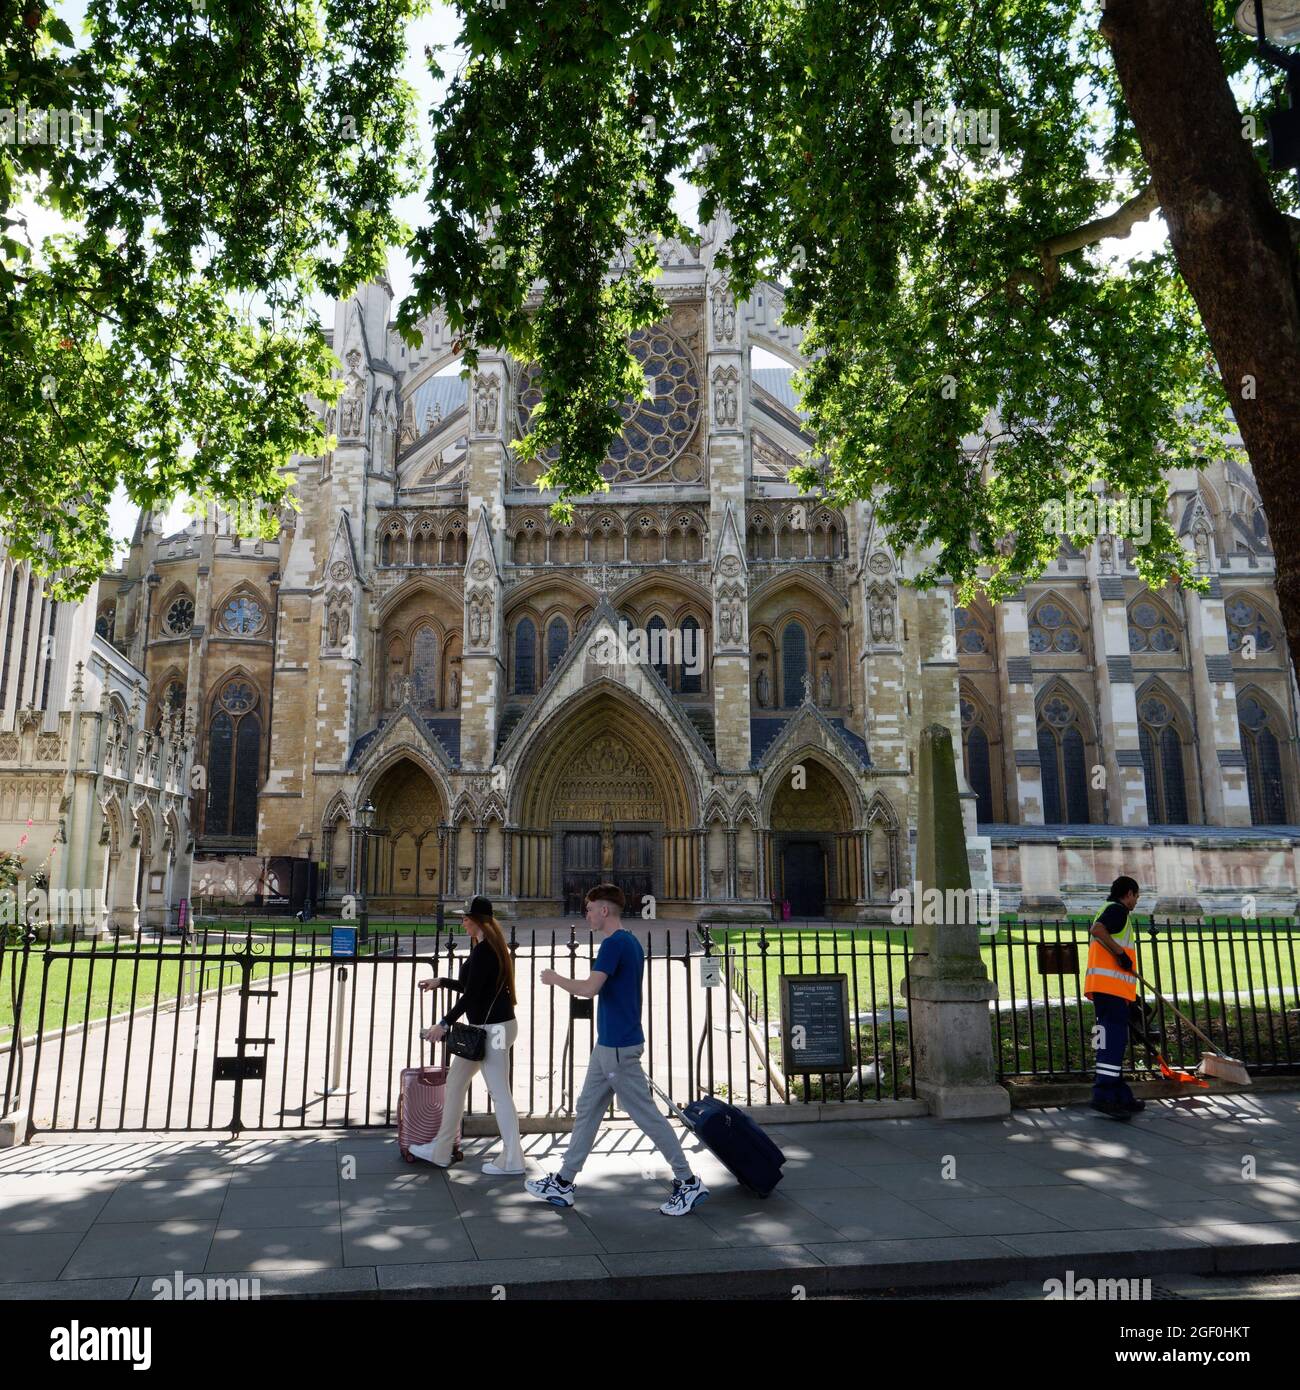 London, Greater London, England, August 10 2021: Elaborate facade of Gothic Westminster Abbey as seen from Parliament Square. Stock Photo